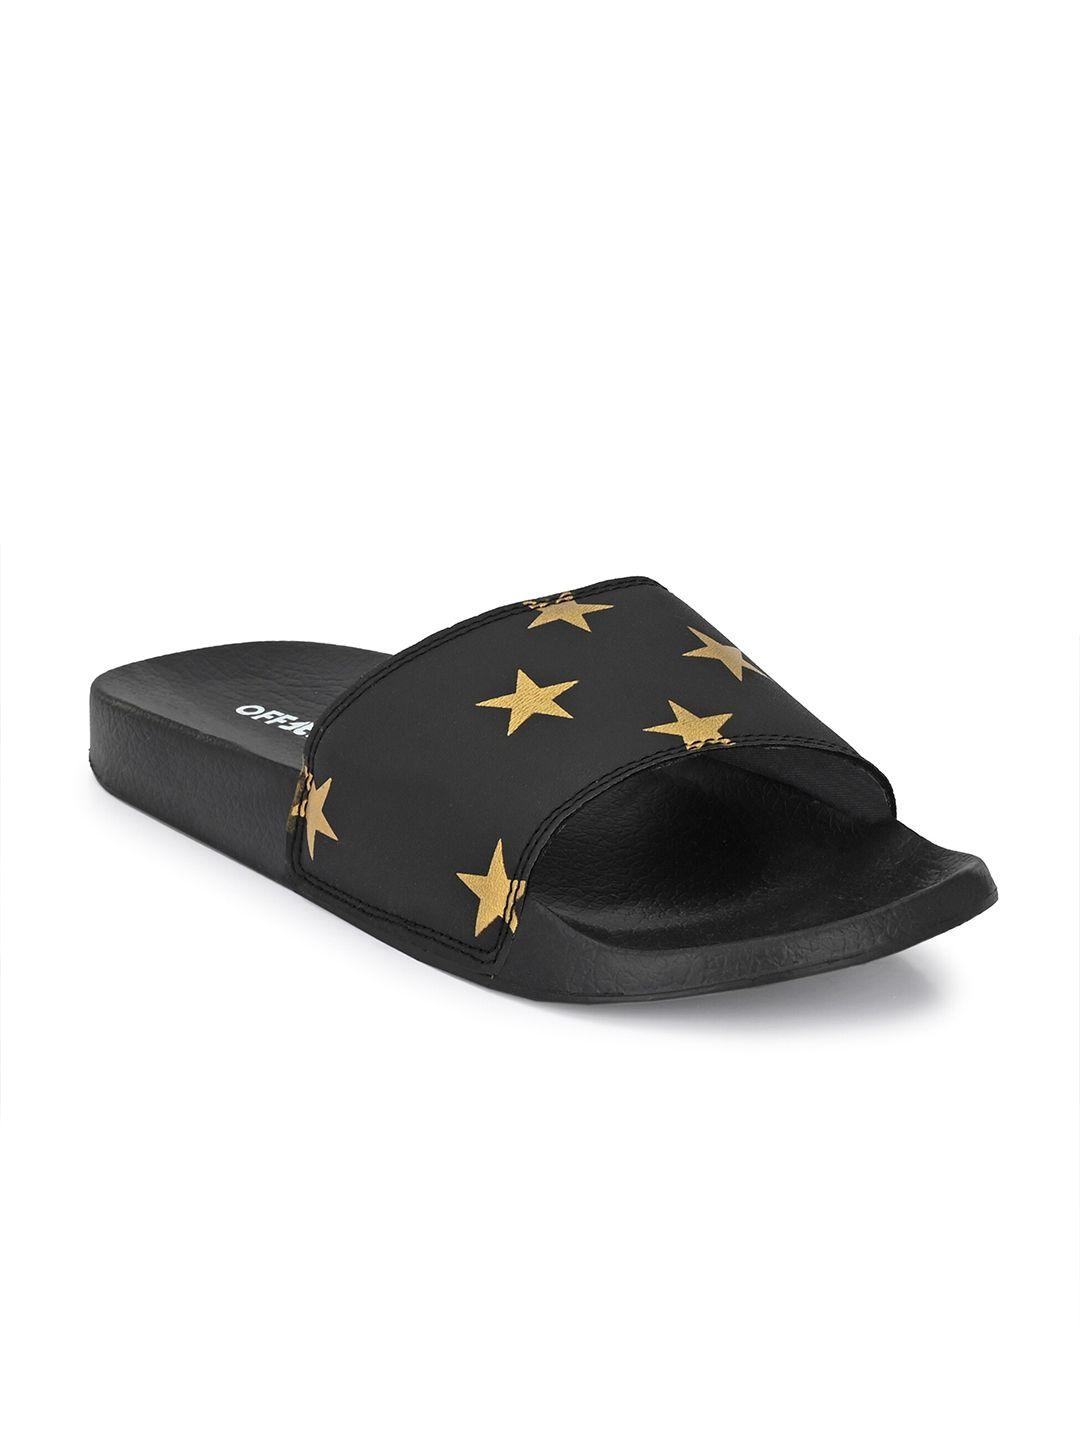 off-limits-women-black-&-gold-toned-printed-sliders